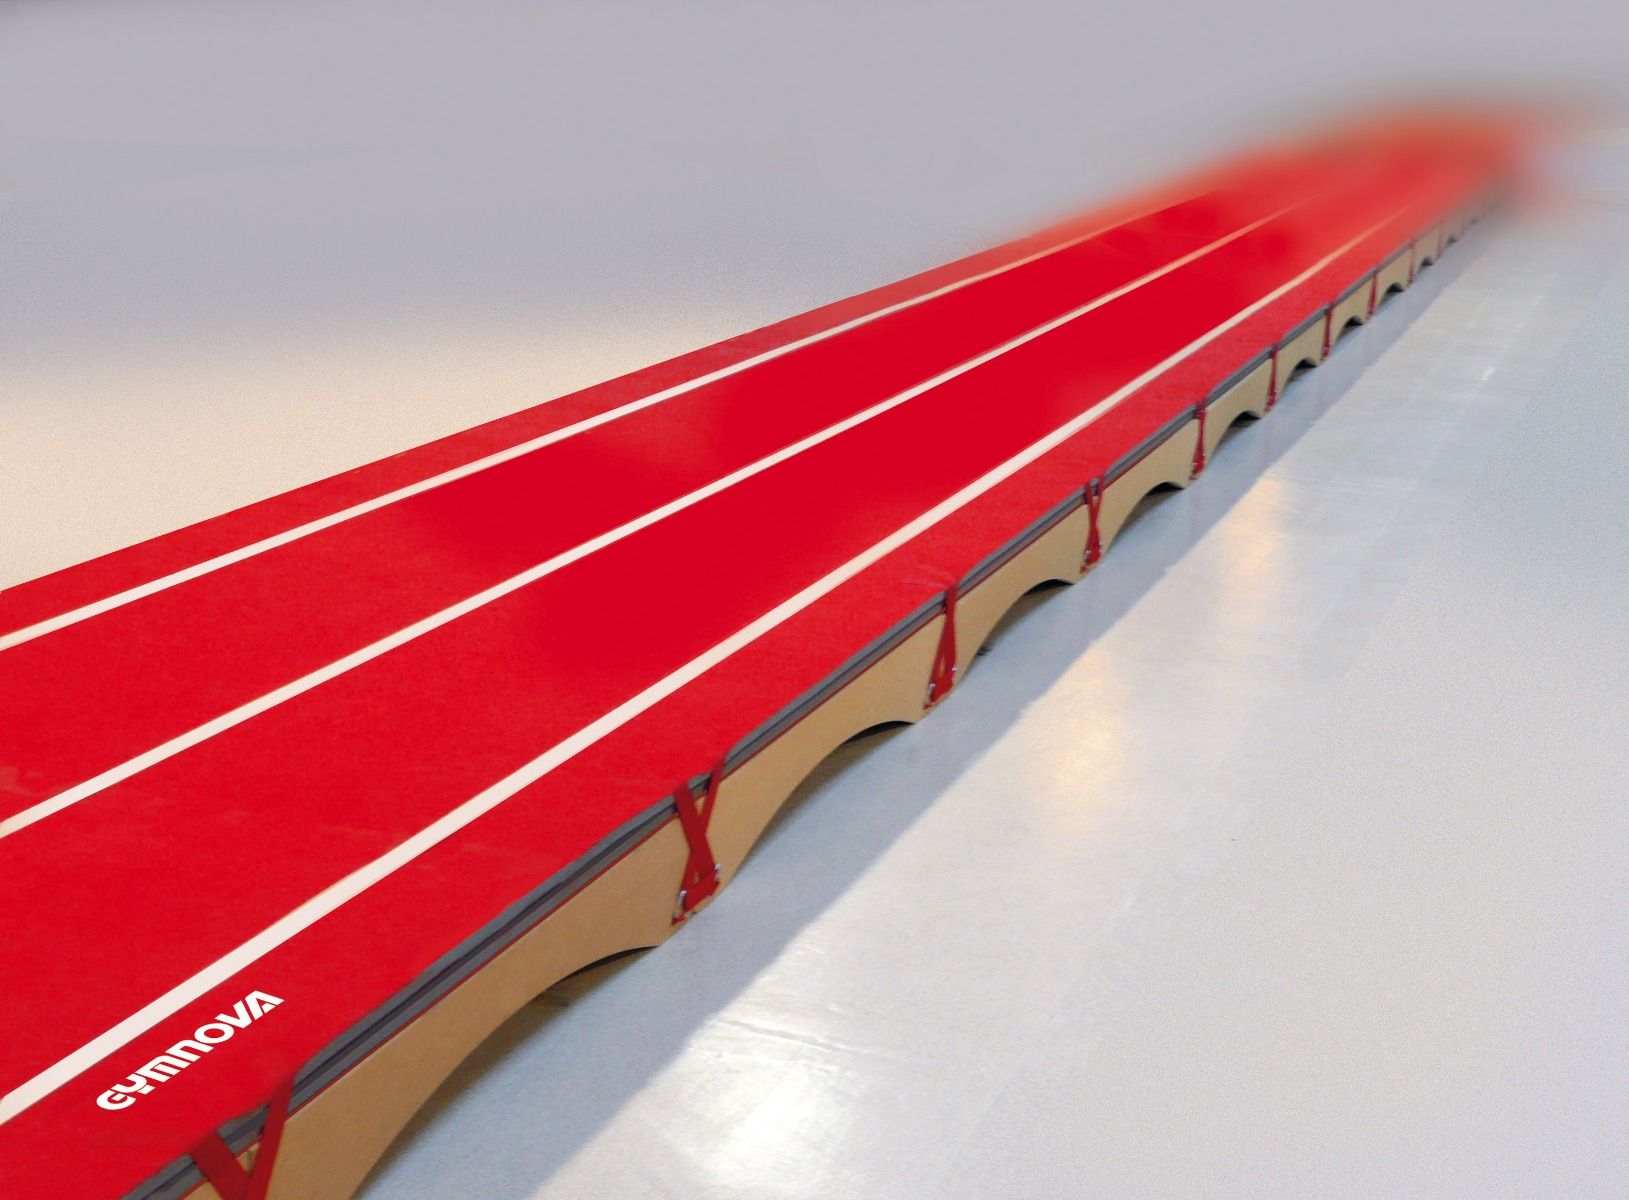 COMPLETE TUMBLING TRACK NOVATRACK'ONE - FIG Approved